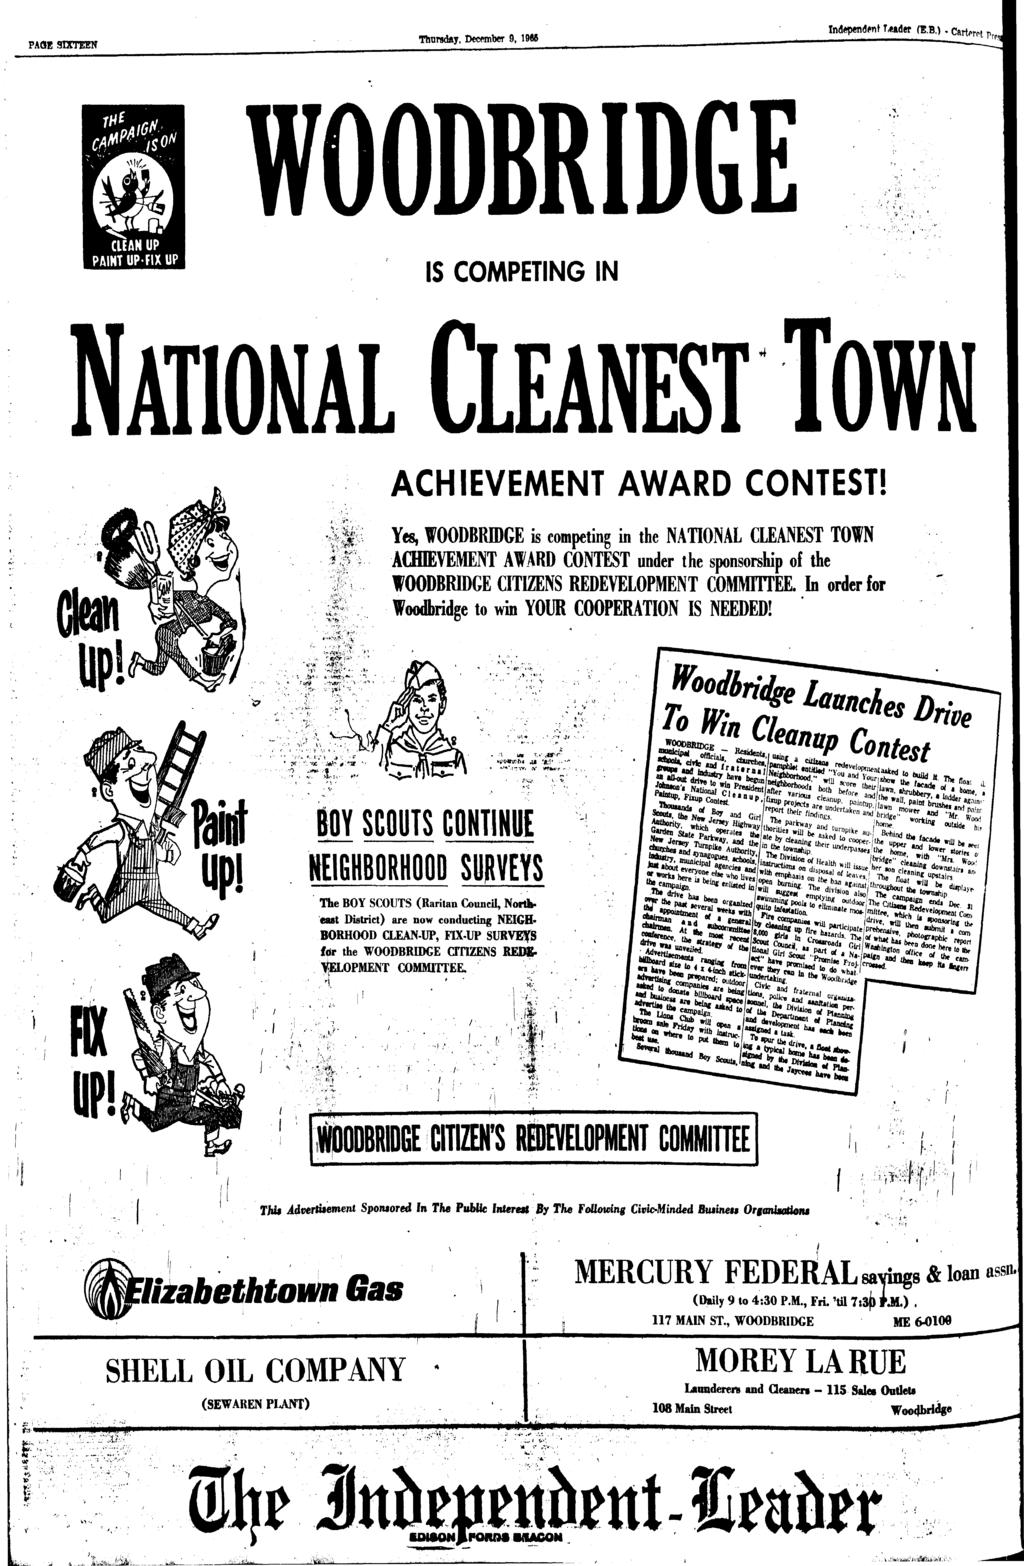 *.., - ). PAGE SXTEEN Thursday, December 9, 9W ndependent T,«ader fe.b.). WOODBRDGE S COMPETNG N NATONAL CLEANEST TOWN ACHEVEMENT AWARD CONTEST! w- V J f > -.V-f--,. :,.. ".- :r-".«-v. -. Yes, f OODBRDGE s competng n the NATONAL CLEANEST TOWN ACHEVEMENT AWARD CONTEST under the sponsorshp of the f OODBRDGE CTZENS REDEVELOPMENT COMMTTEE.